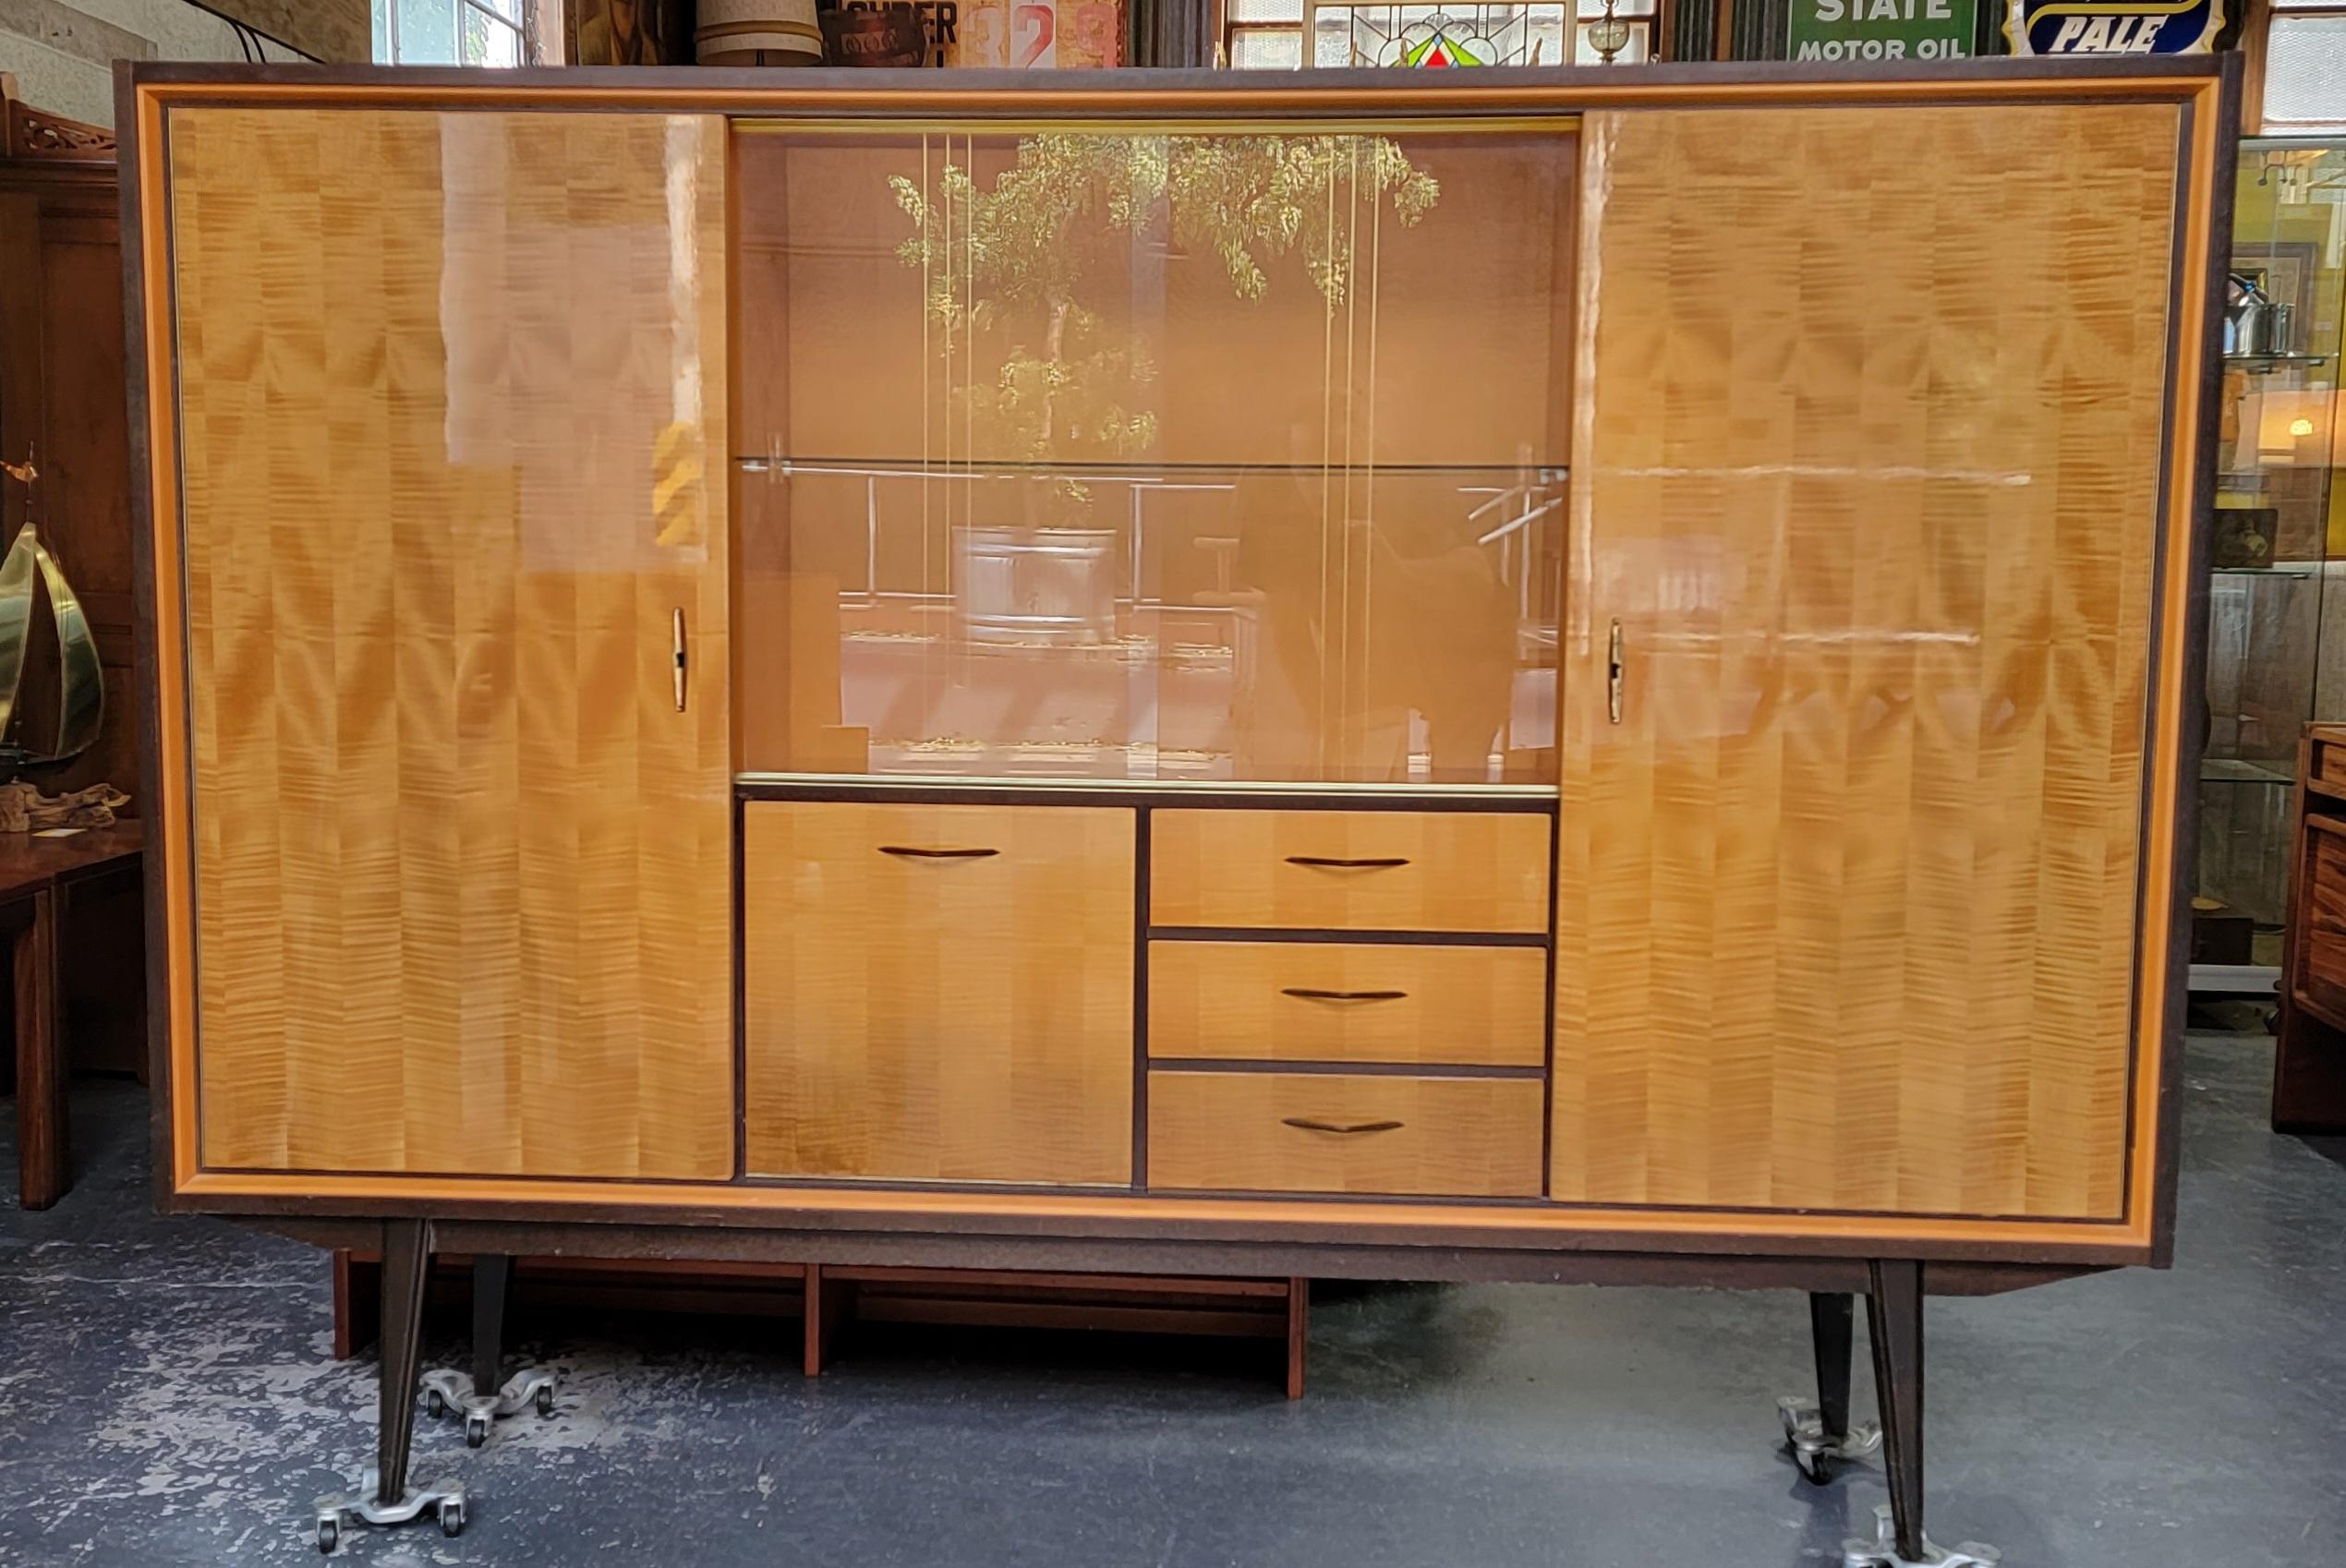 Extraordinary Large-Scale dry bar storage cabinet. Exotic wood grain doors, ribbon cut mahogany interior. Sliding glass doors for display, cabinet doors for hidden storage. Flip down door with decorative mirrored dry bar. It was difficult to